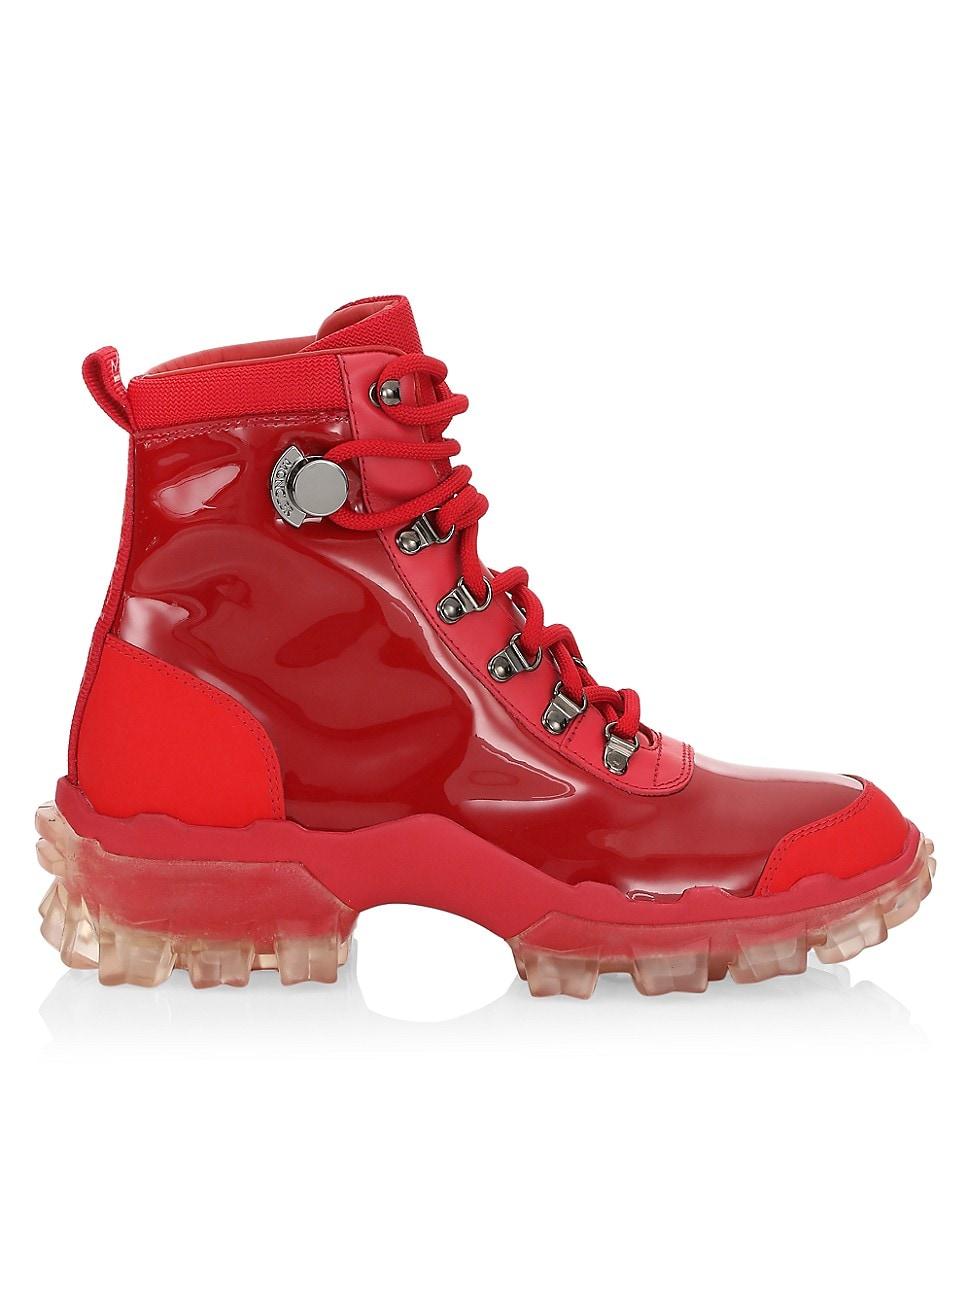 Moncler Helis Patent Leather Hiking Boots in Red | Lyst